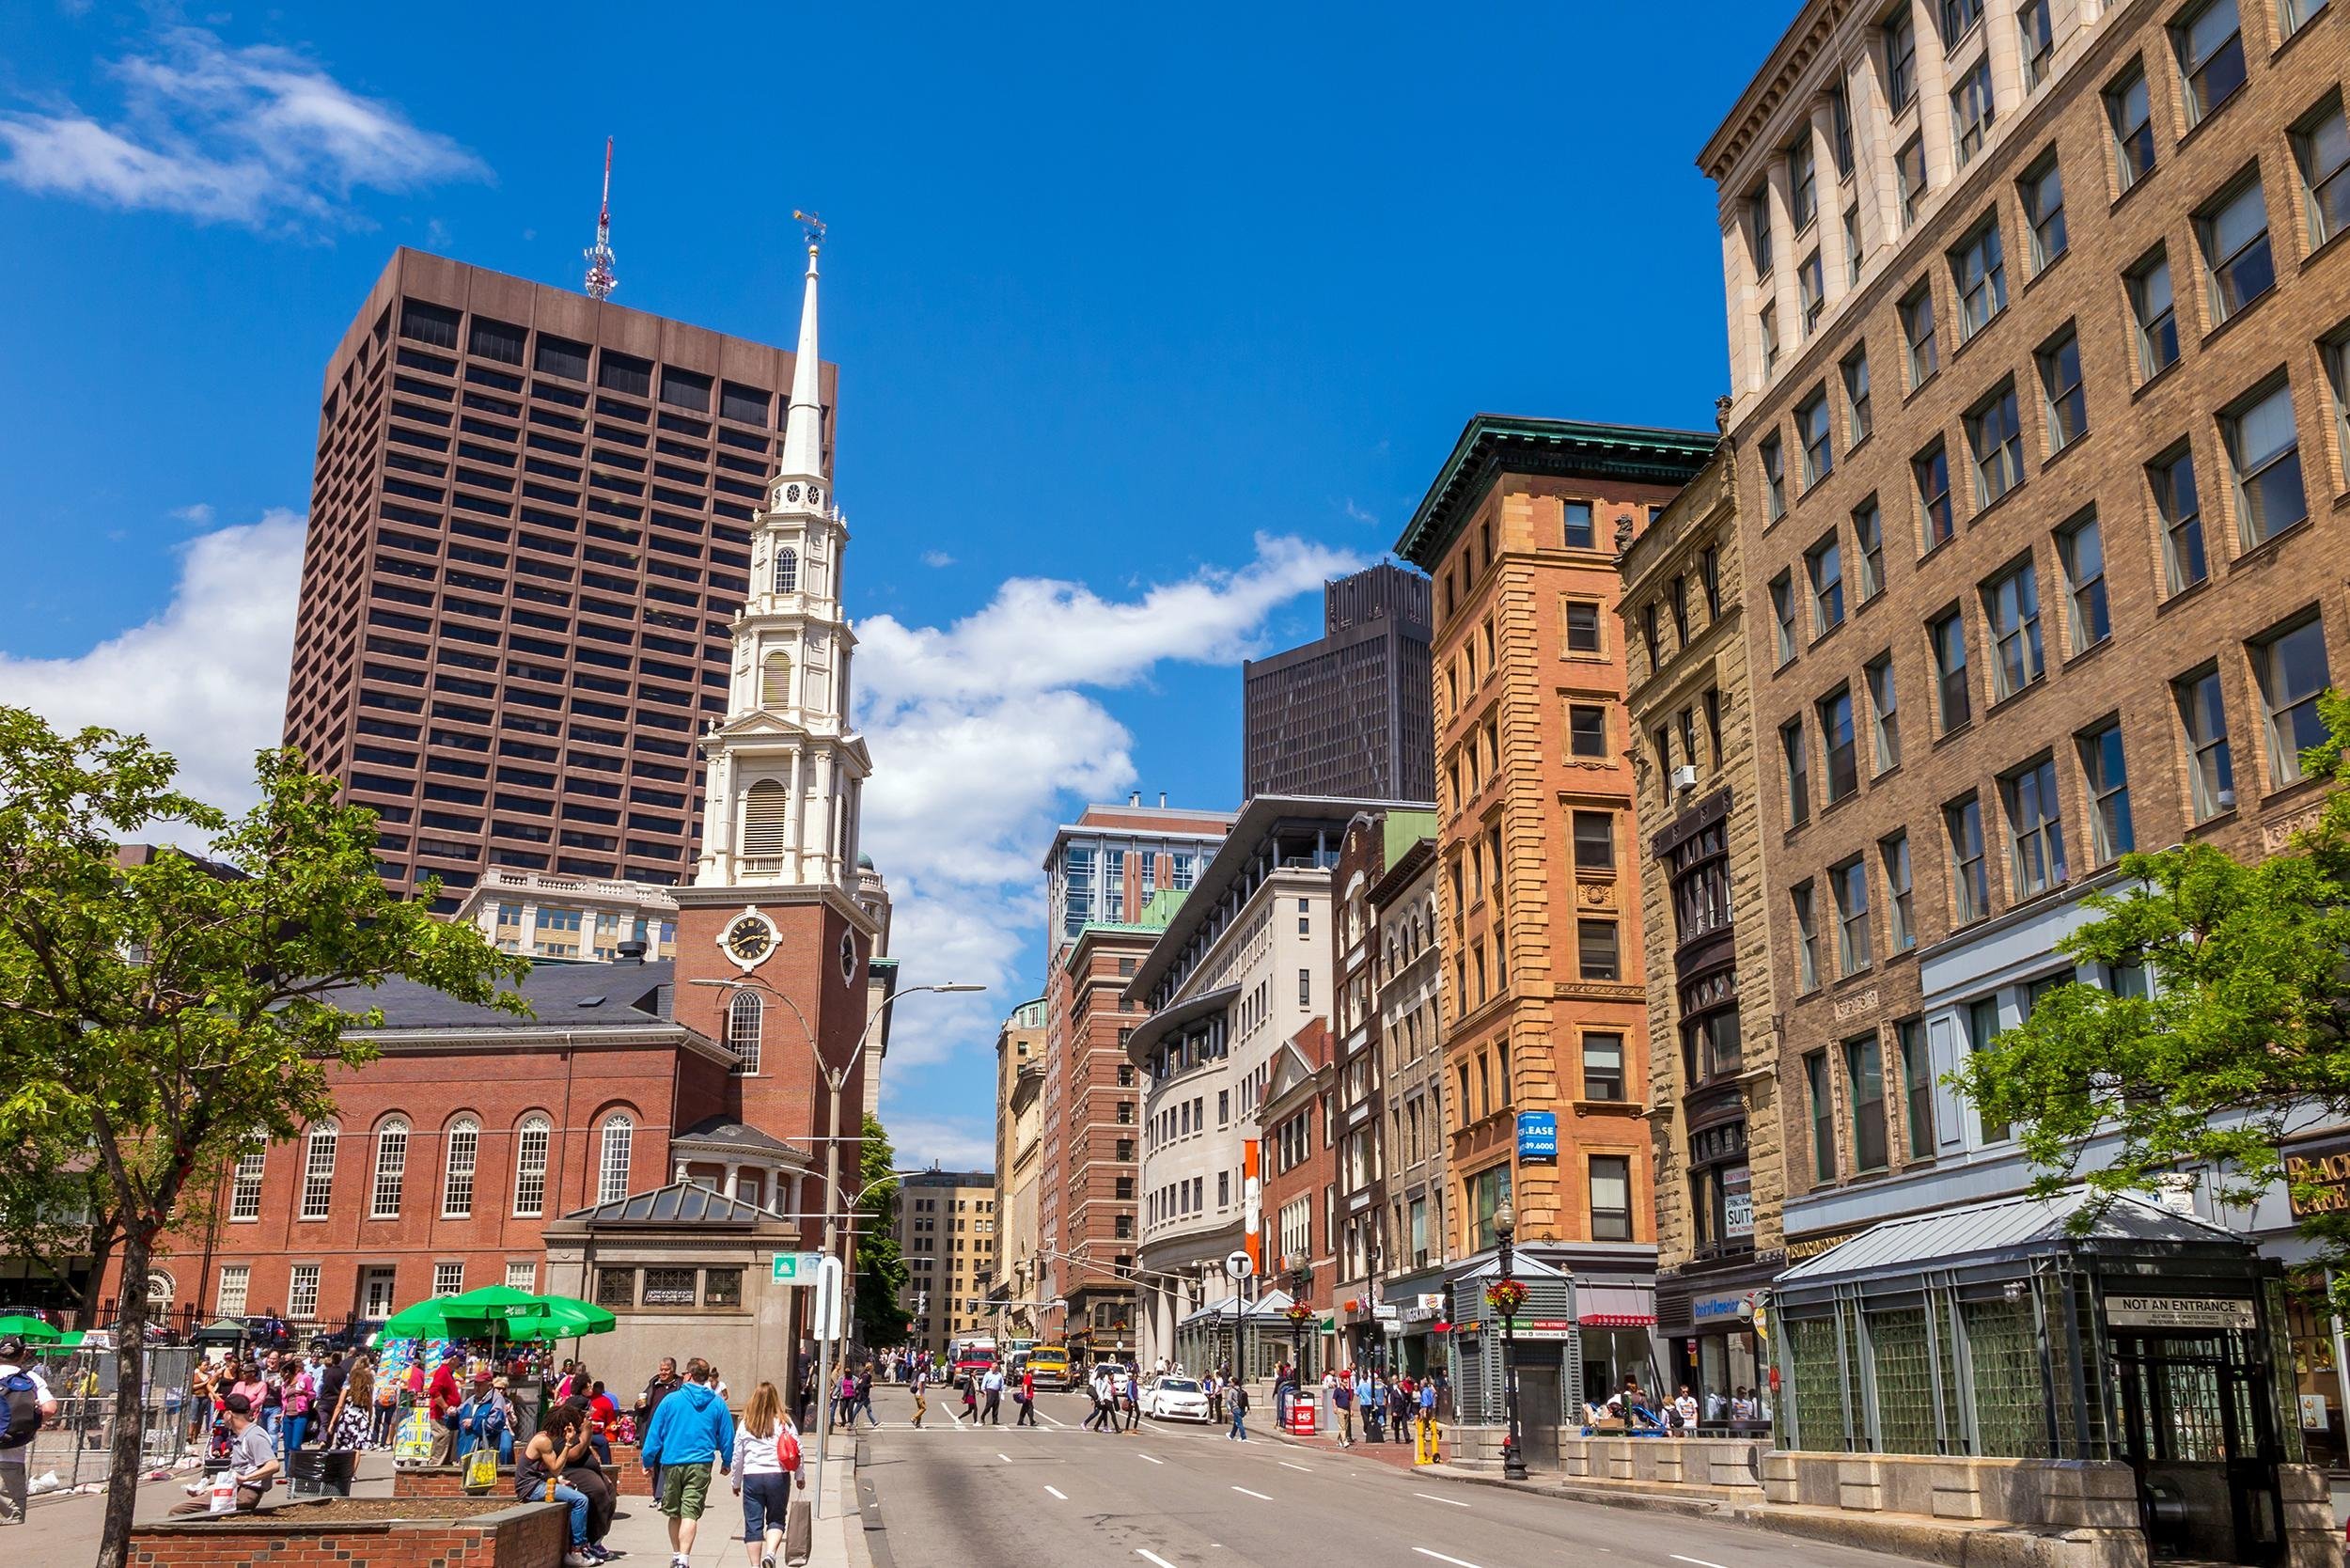 <p>Take a history-filled adventure and walking tour of Boston along the 2.5-mile <a href="https://www.thefreedomtrail.org/book-tour/public-tours.shtml">Freedom Trail</a>, which winds through the city's neighborhoods, with stops at more than 16 sites; many are free to enter. Purchased online, guided tours cost $8 for children, $16 for adults, and $14 for seniors or students, but you can enjoy a free self-guided tour by reading information at each site and using the official Freedom Trail Foundation app.</p><p><b>Related:</b> <a href="https://blog.cheapism.com/best-road-trips-america/">30 Beautiful Road Trips That Celebrate American History</a></p>